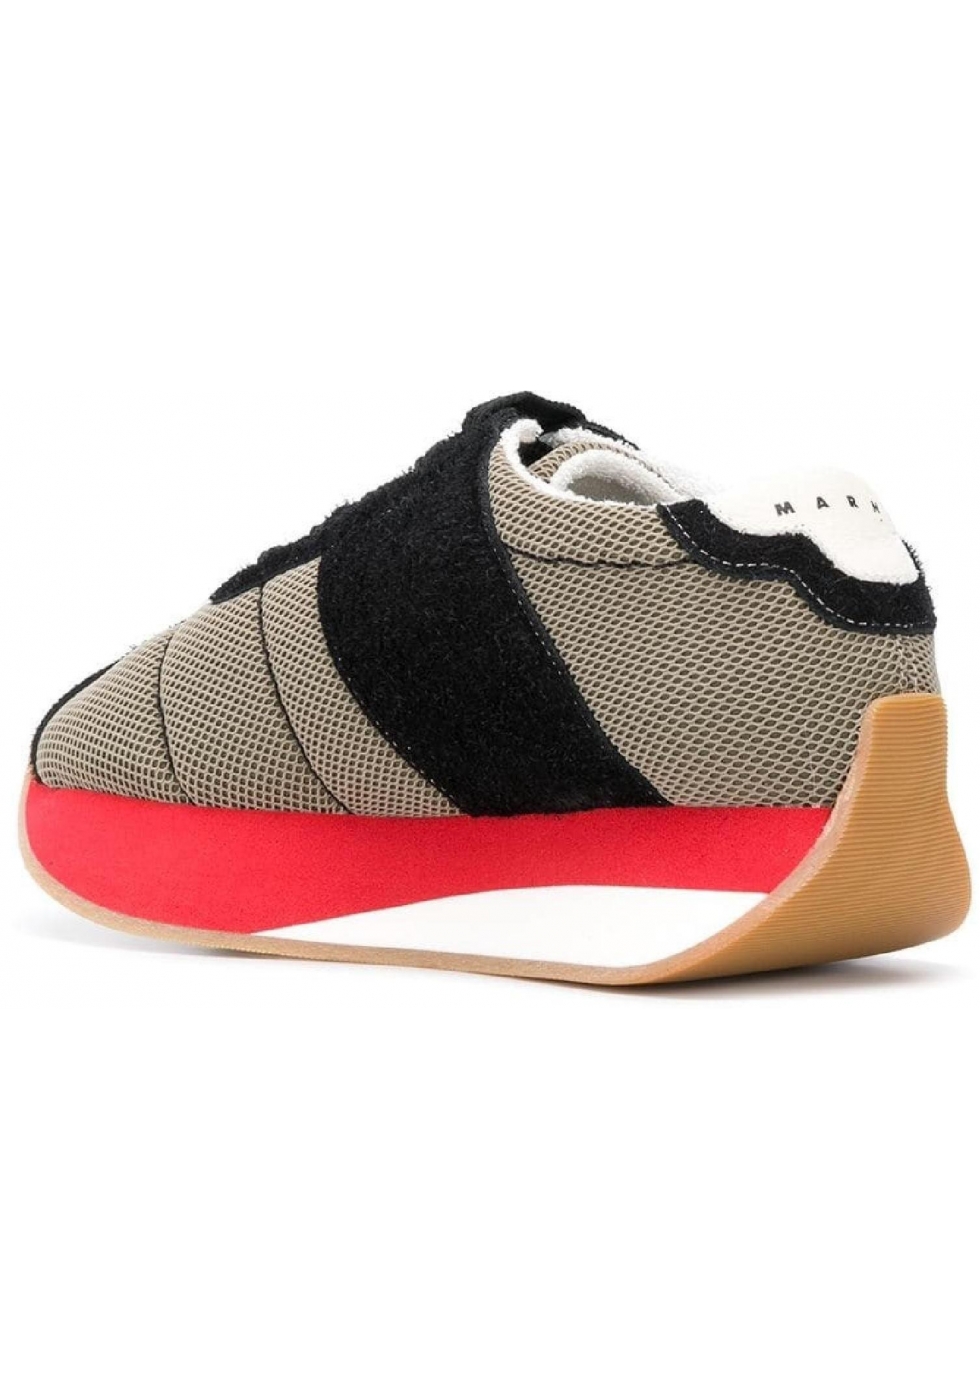 Marni Woman sneakers in beige fabric with high red rubber sole ...